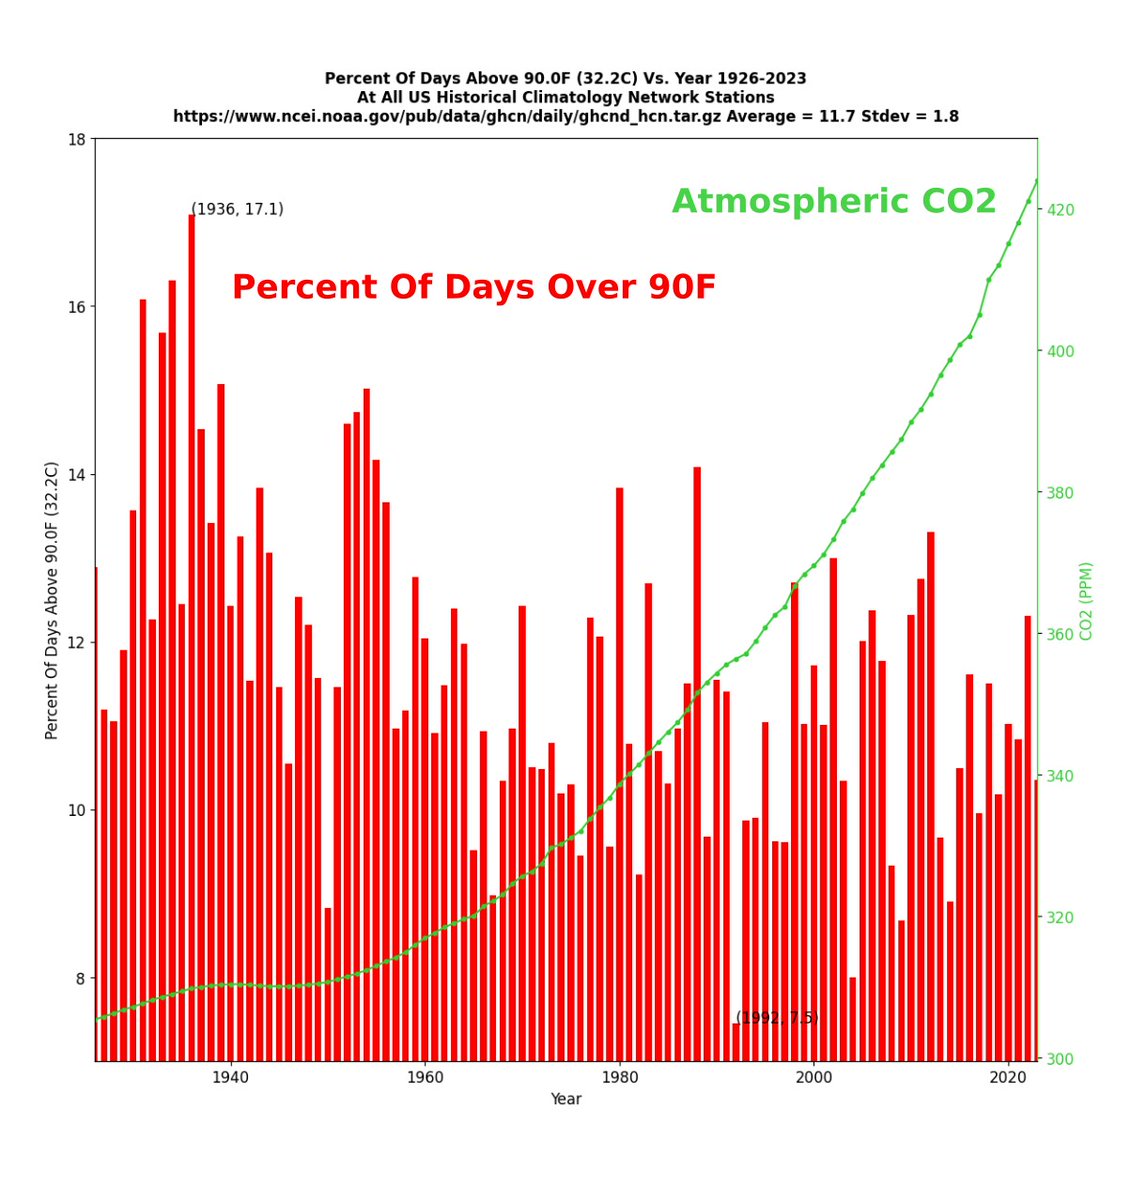 Burn acreage and the frequency of hot afternoons have both decreased in the US as atmospheric CO2 has increased. The #ClimateScam has nothing to do with science.